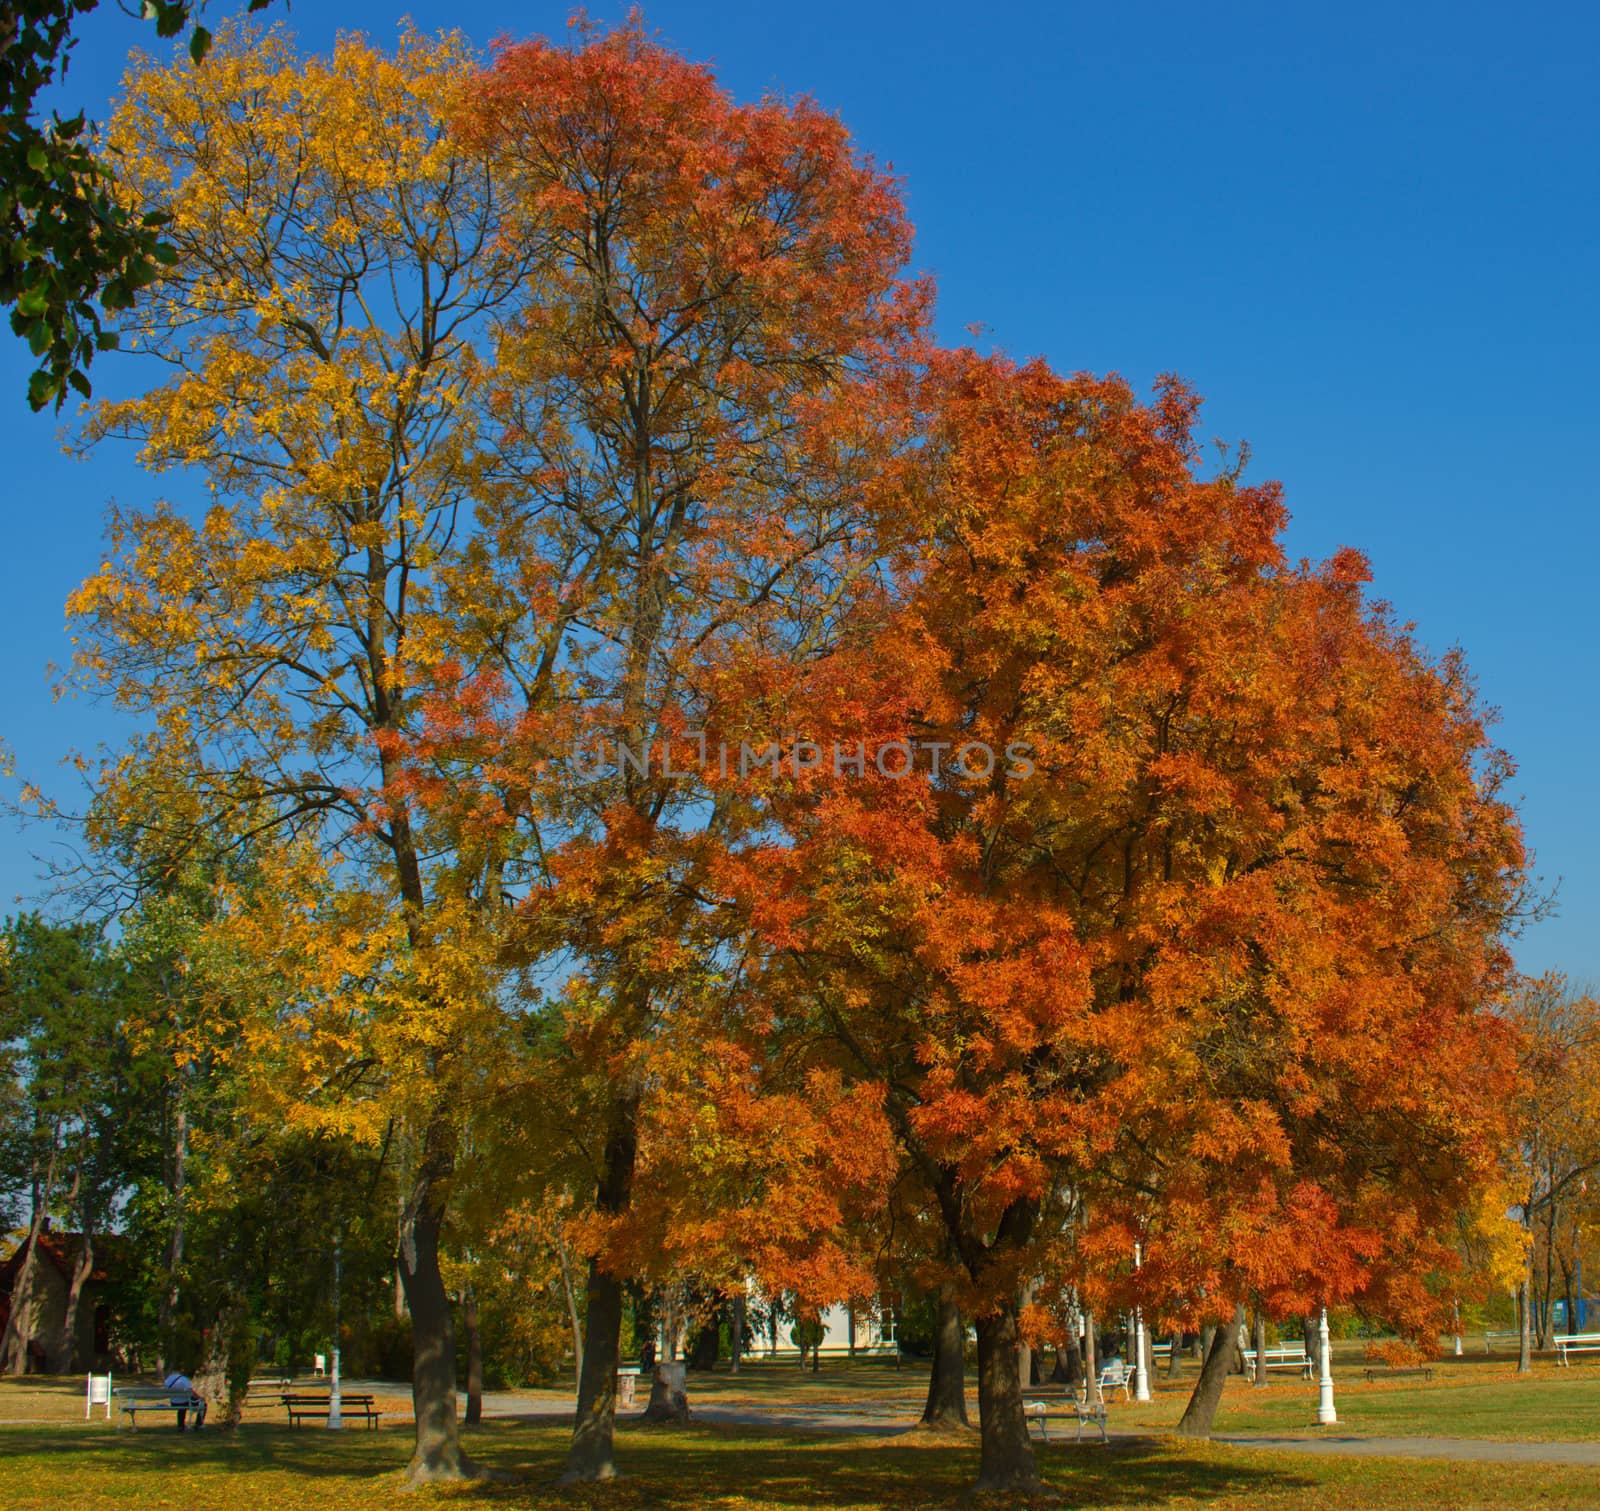 Several trees in park with vibrant colored leaves during autumn time